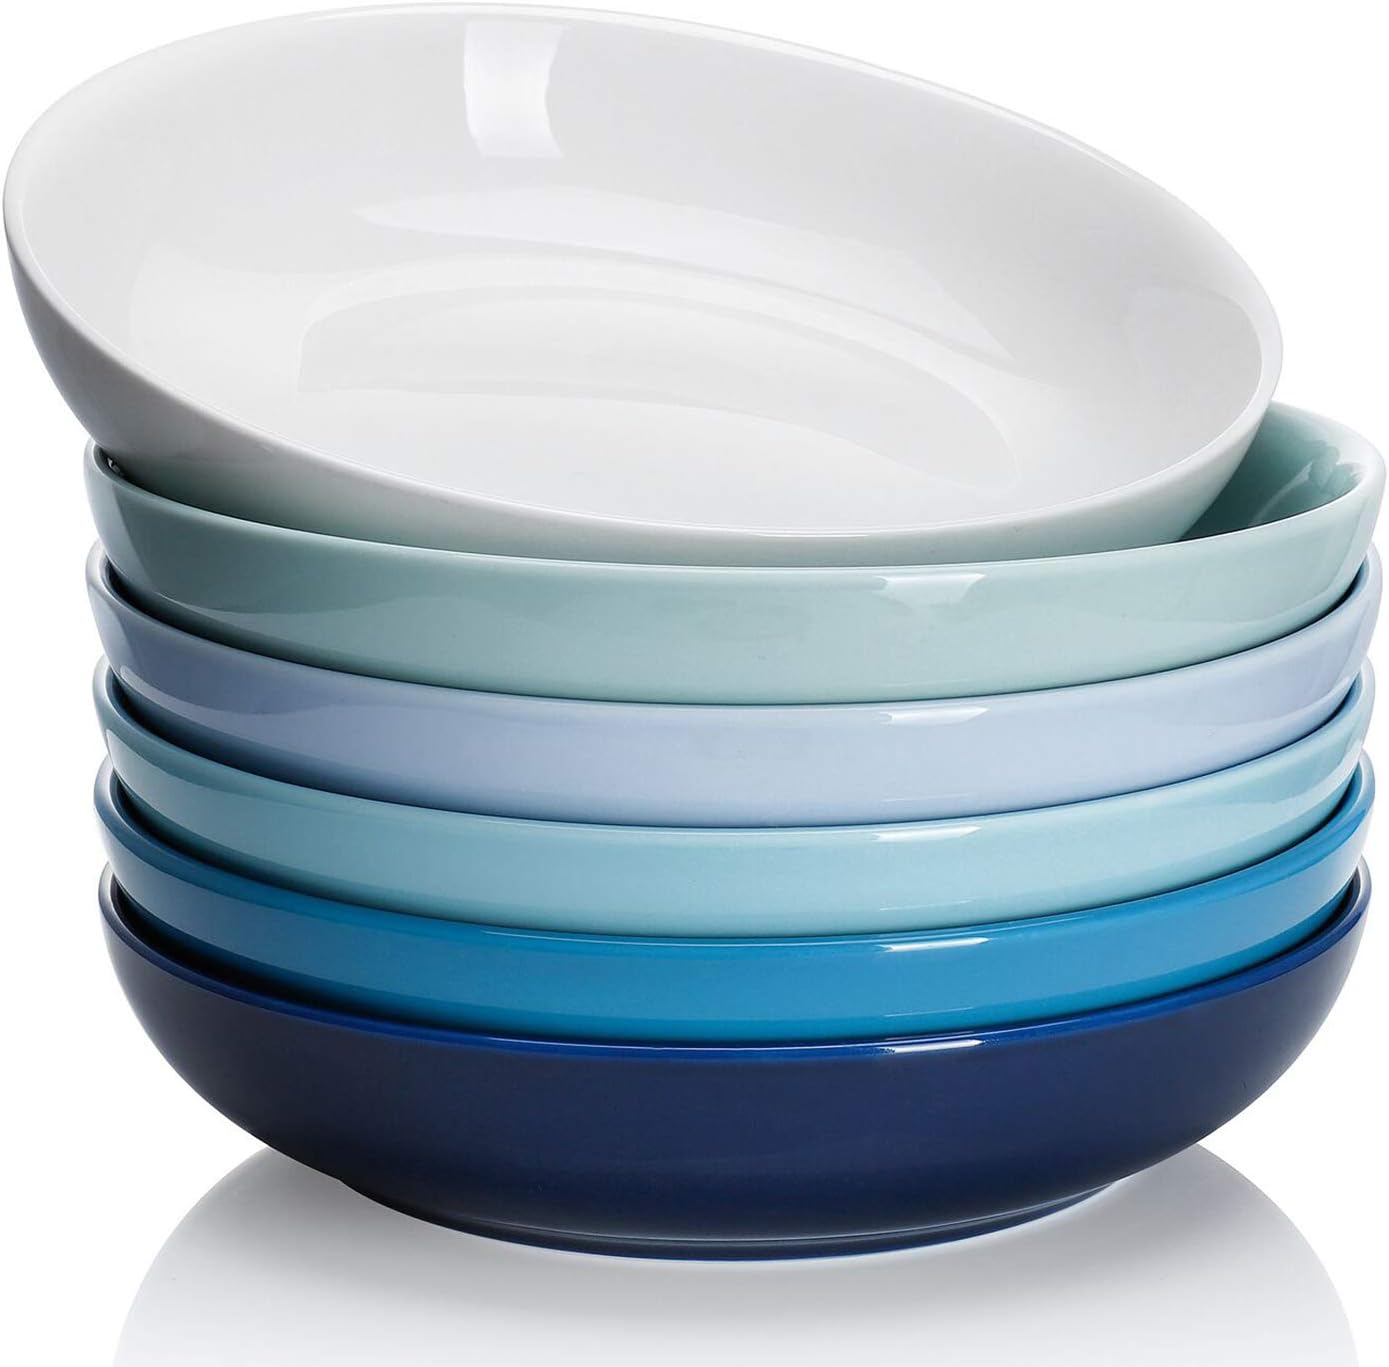 Sweese 112.001 Pasta Bowls 22 Ounces 